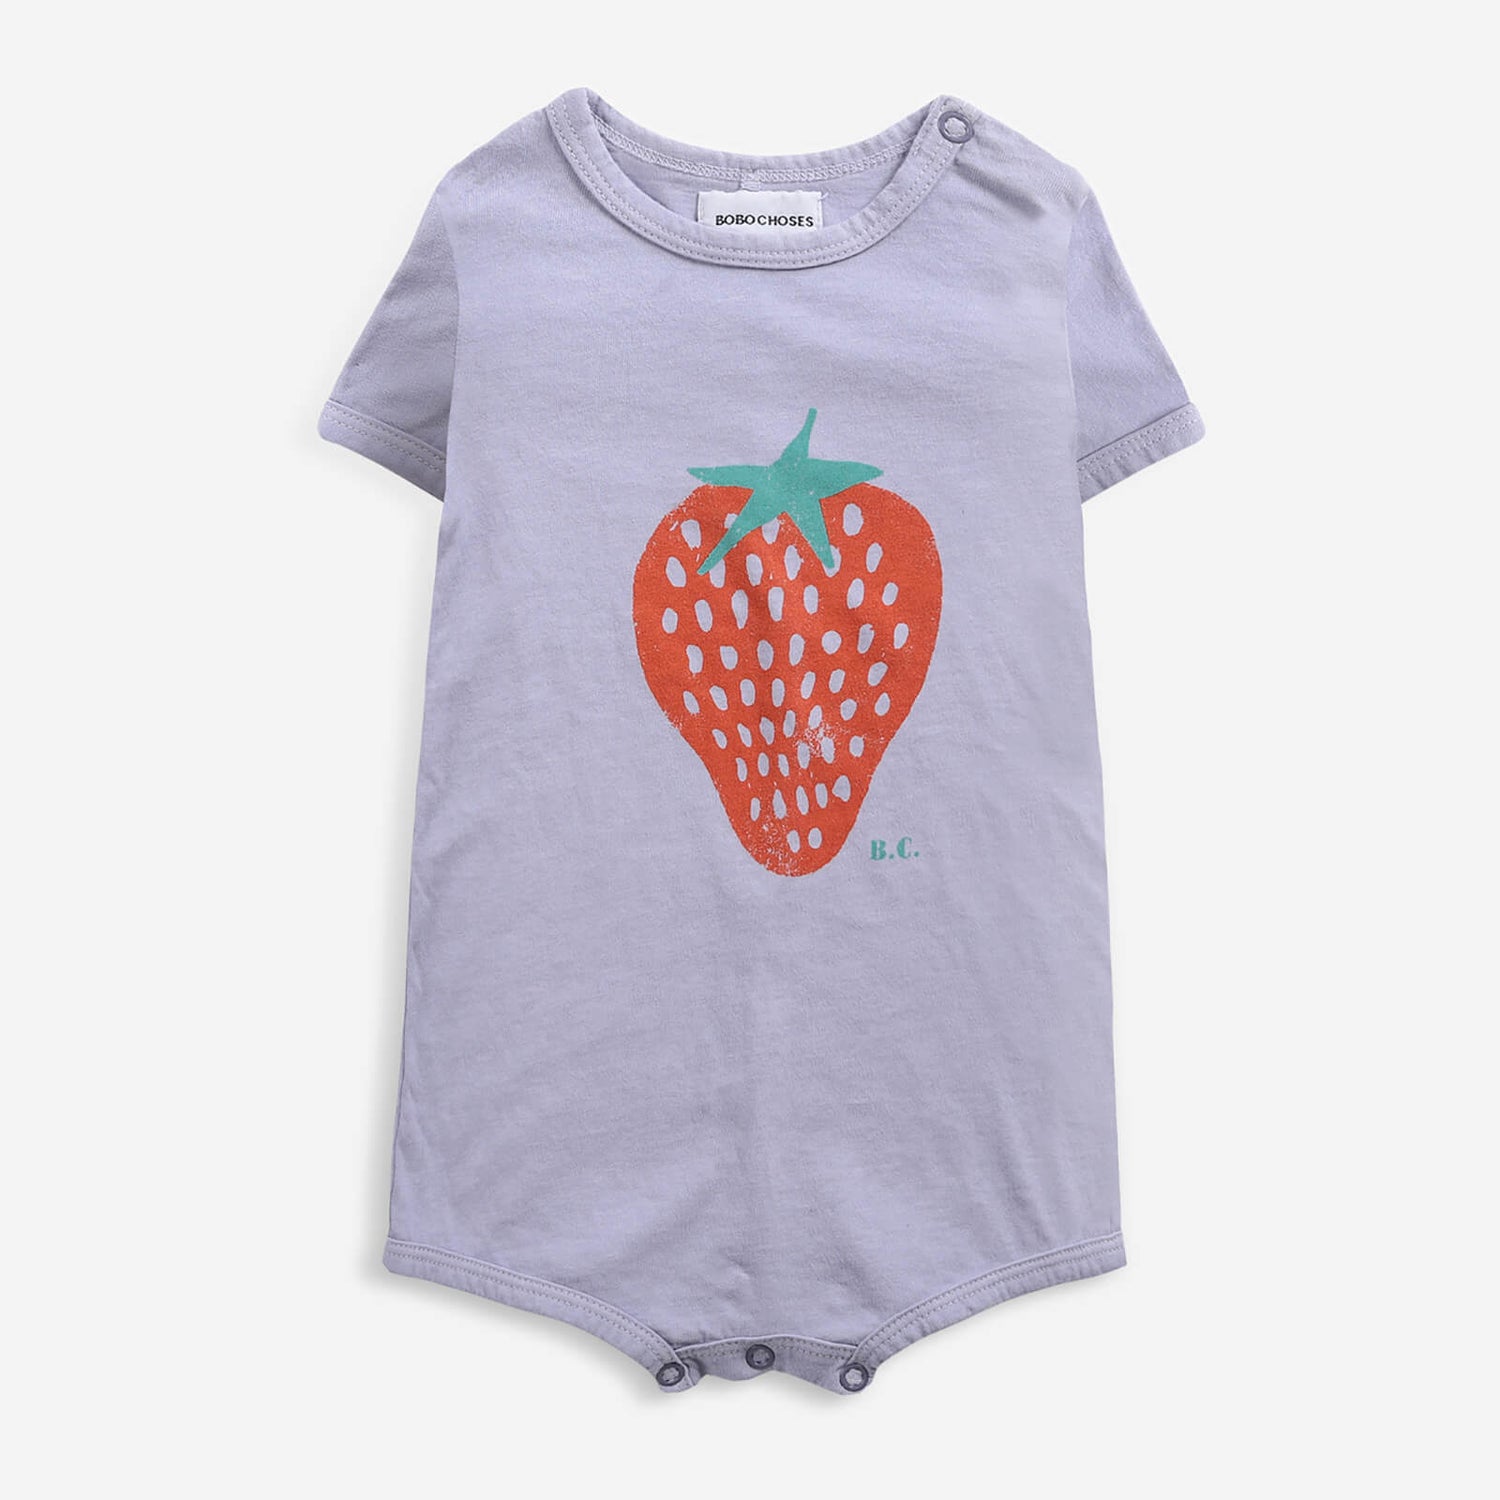 BoBo Choses Baby Strawberry Playsuit - 3-6 months